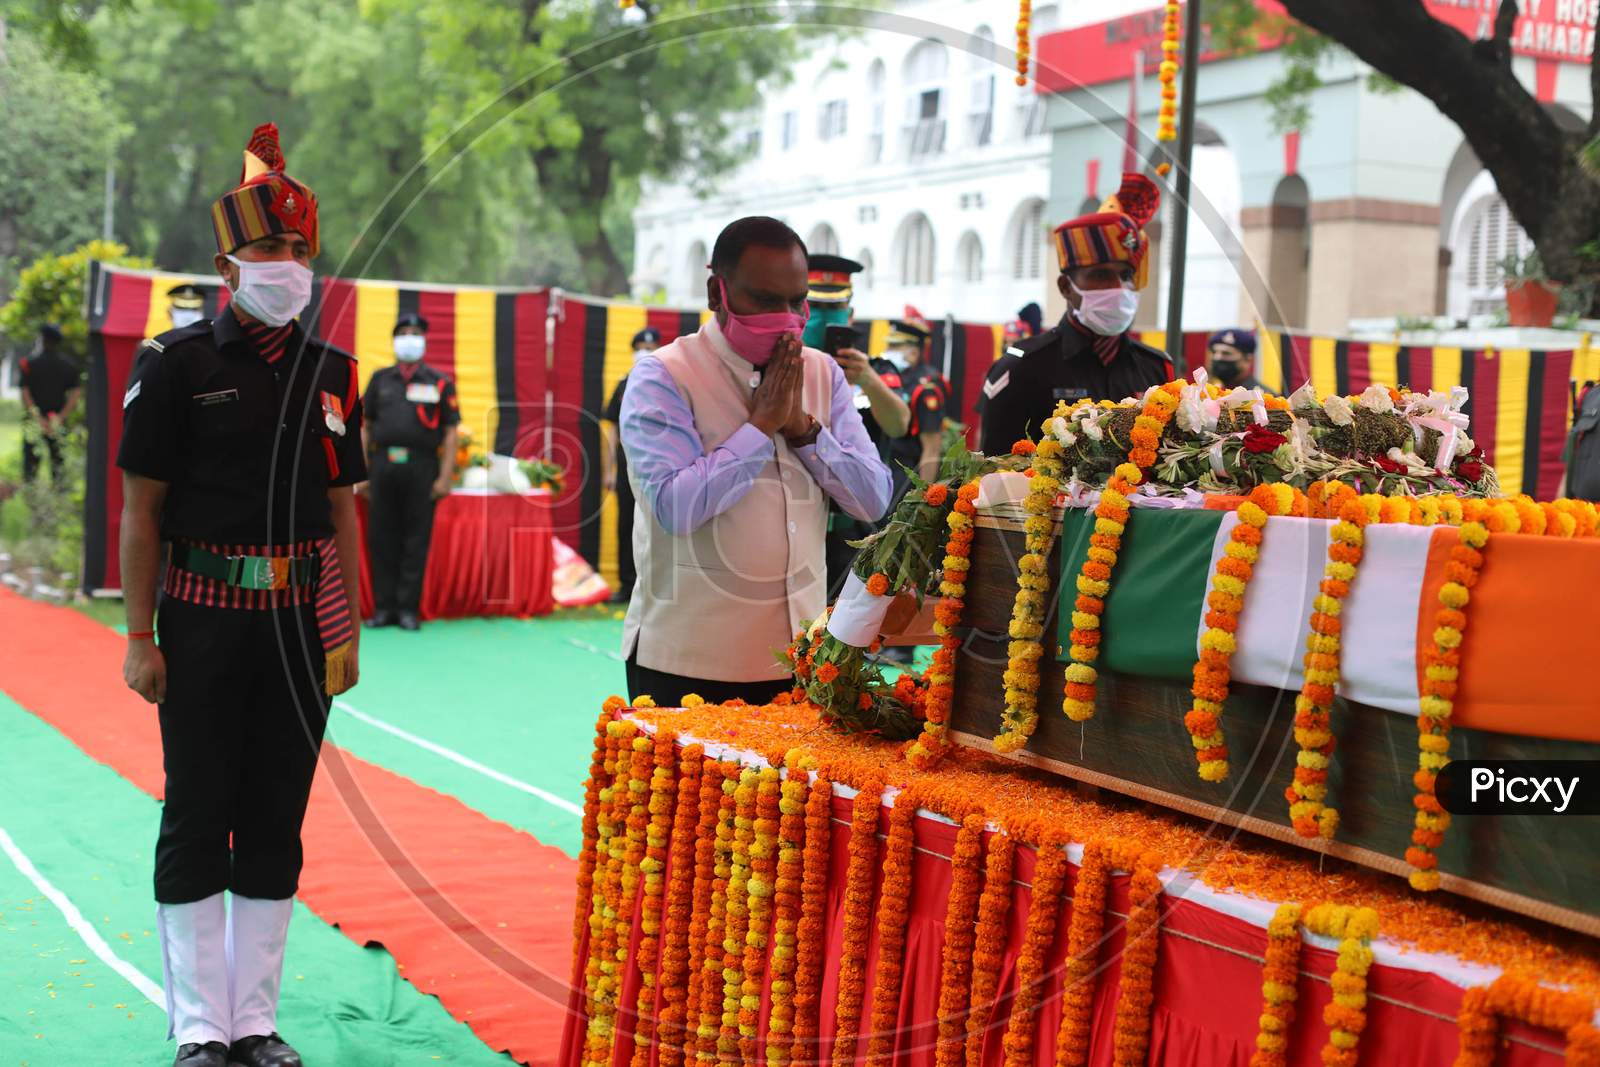 An Officer Salutes At The Coffin Of N K Deepak Singh, An Indian Soldier Who Was Killed In A Border Clash With Chinese Troops In Ladakh Region, During His Funeral Ceremony At Military Hospital In Prayagraj, June 19, 2020.